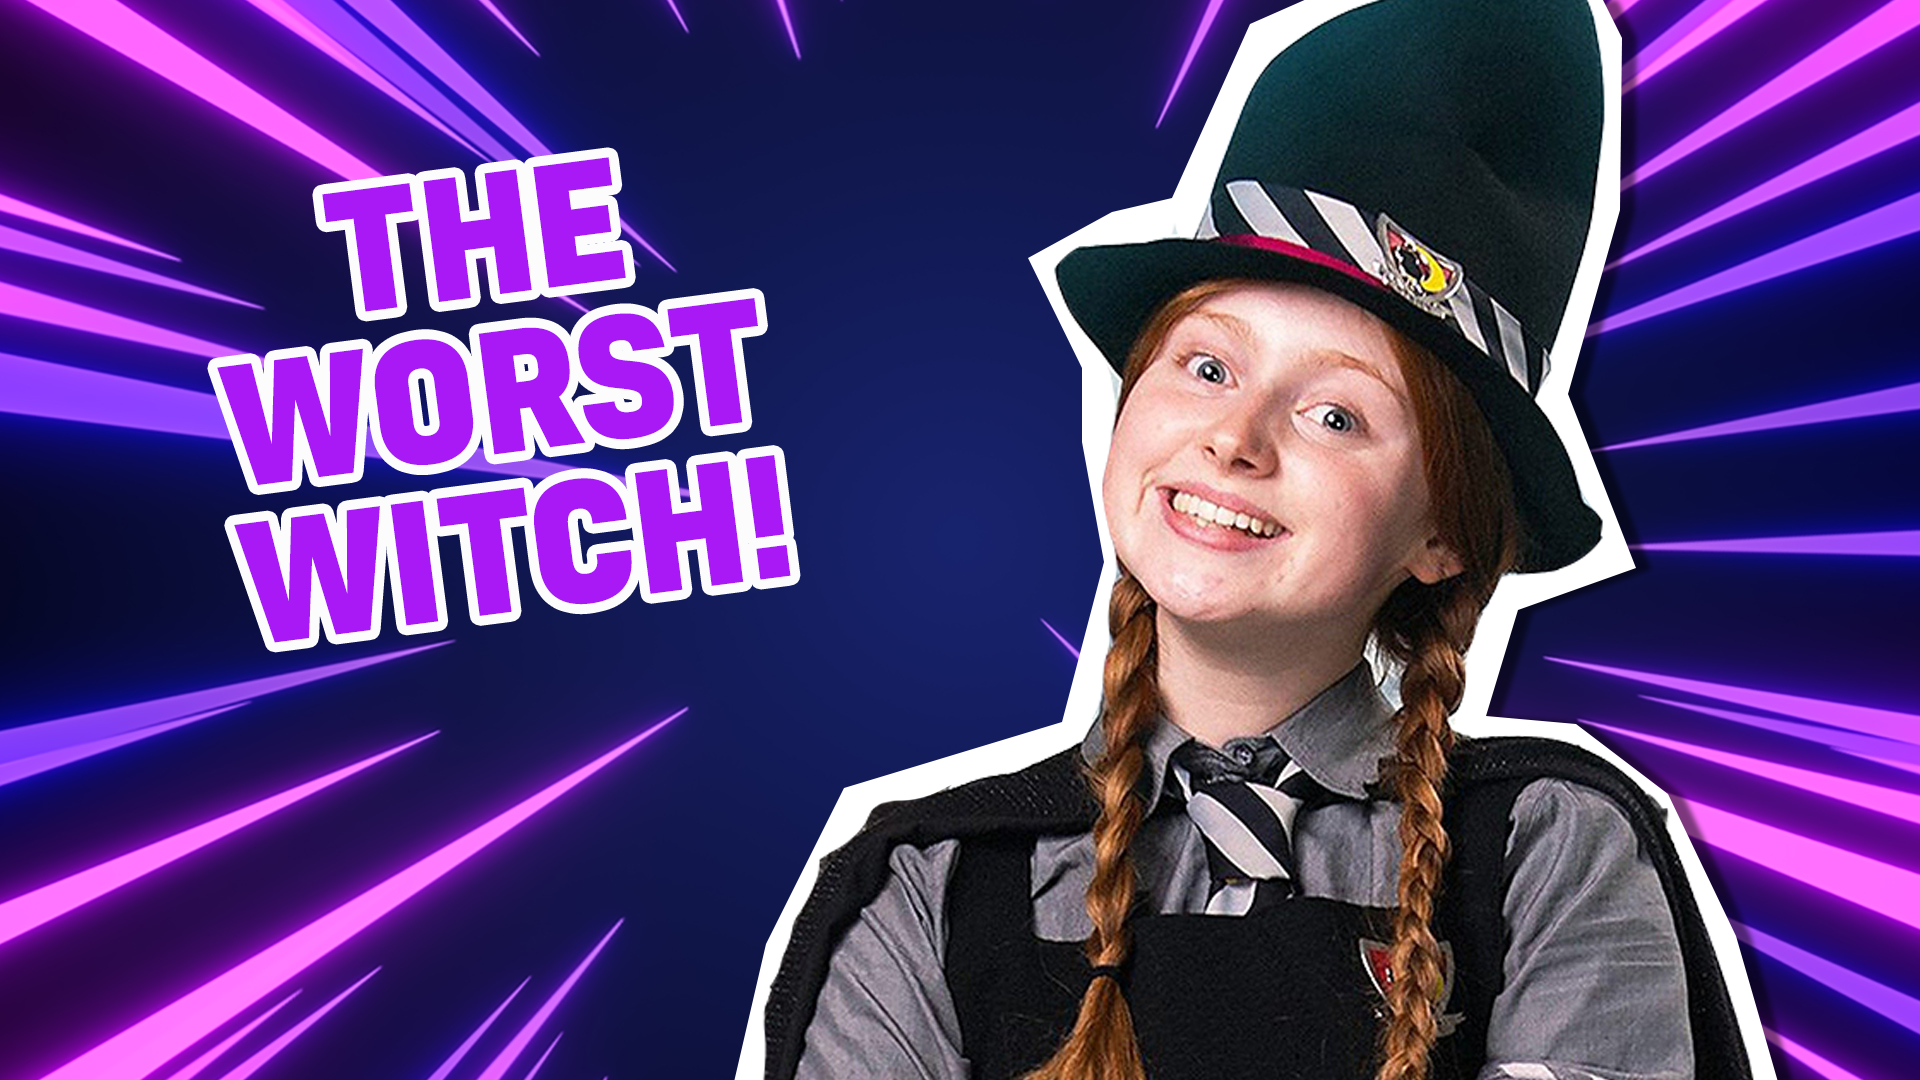 You should watch the Worst Witch! It's jam packed full of magical adventures and mishaps and that's exactly what you need just now!